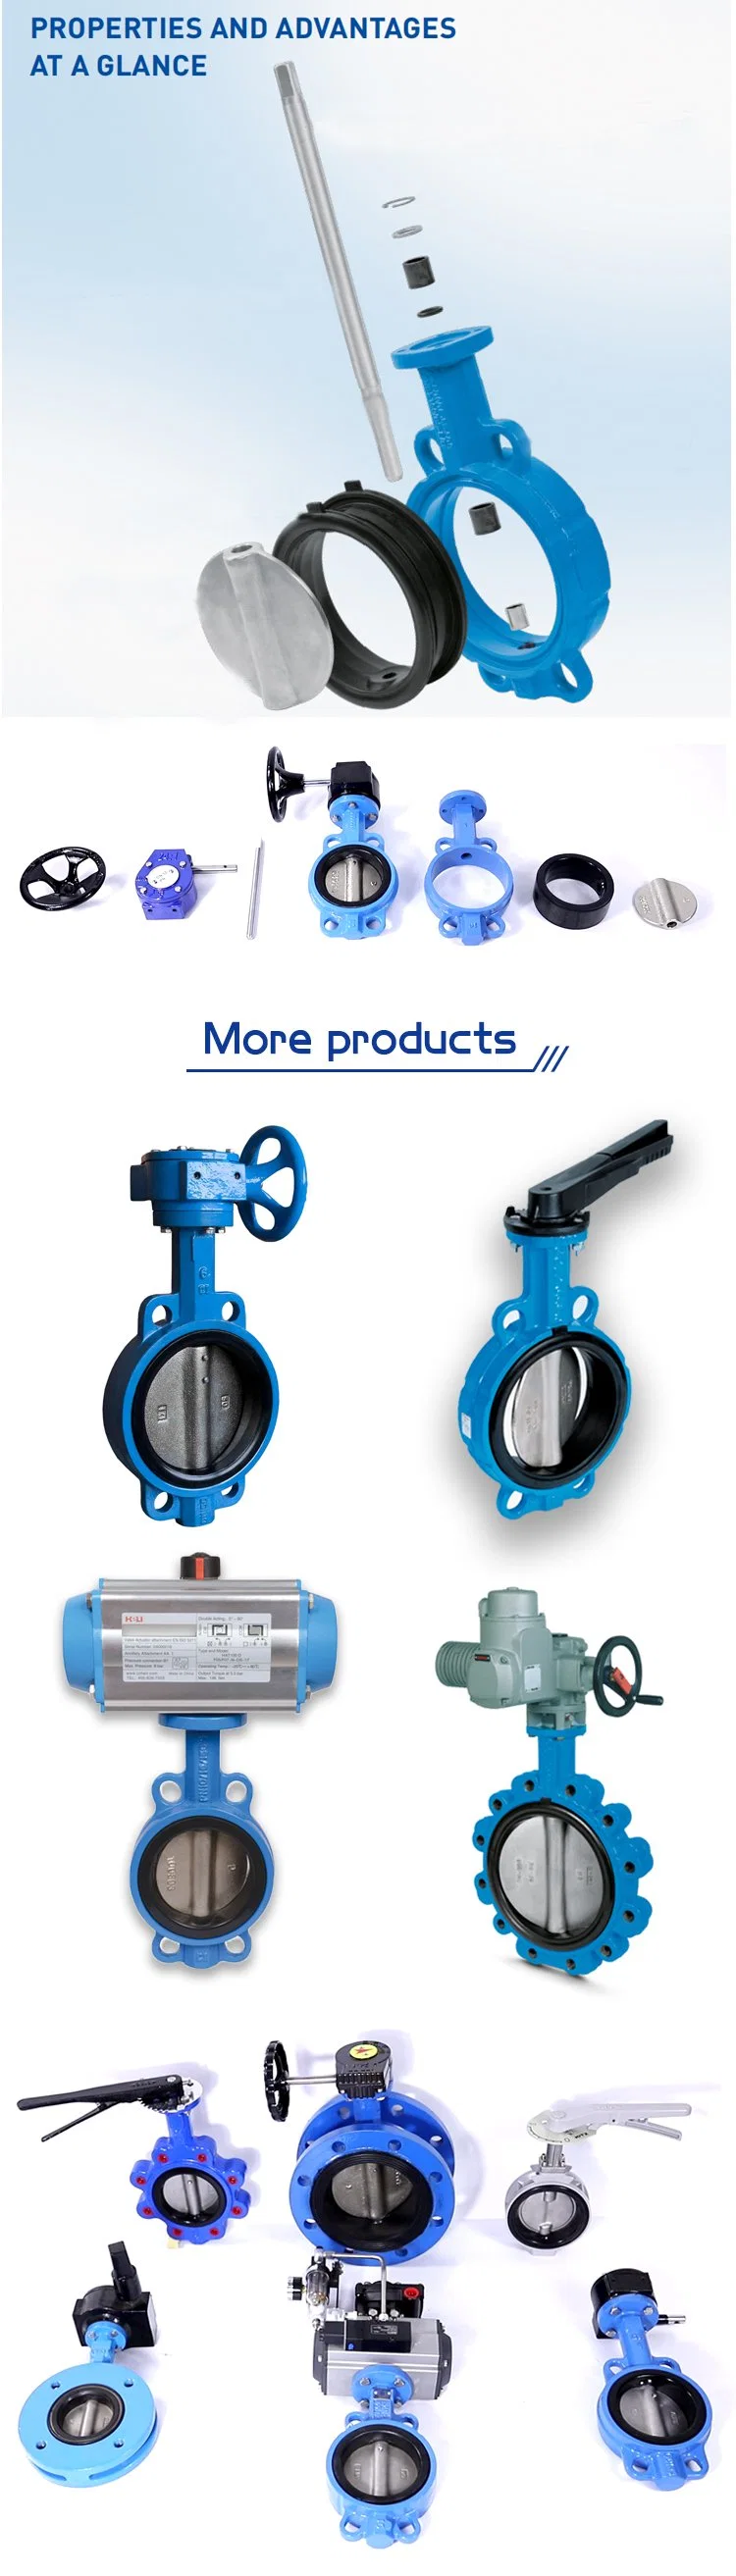 DN200 DN300 Bore Head Square Stem with Top Flange ISO 5211-F10 Ss Body Wafer Butterfly Valve